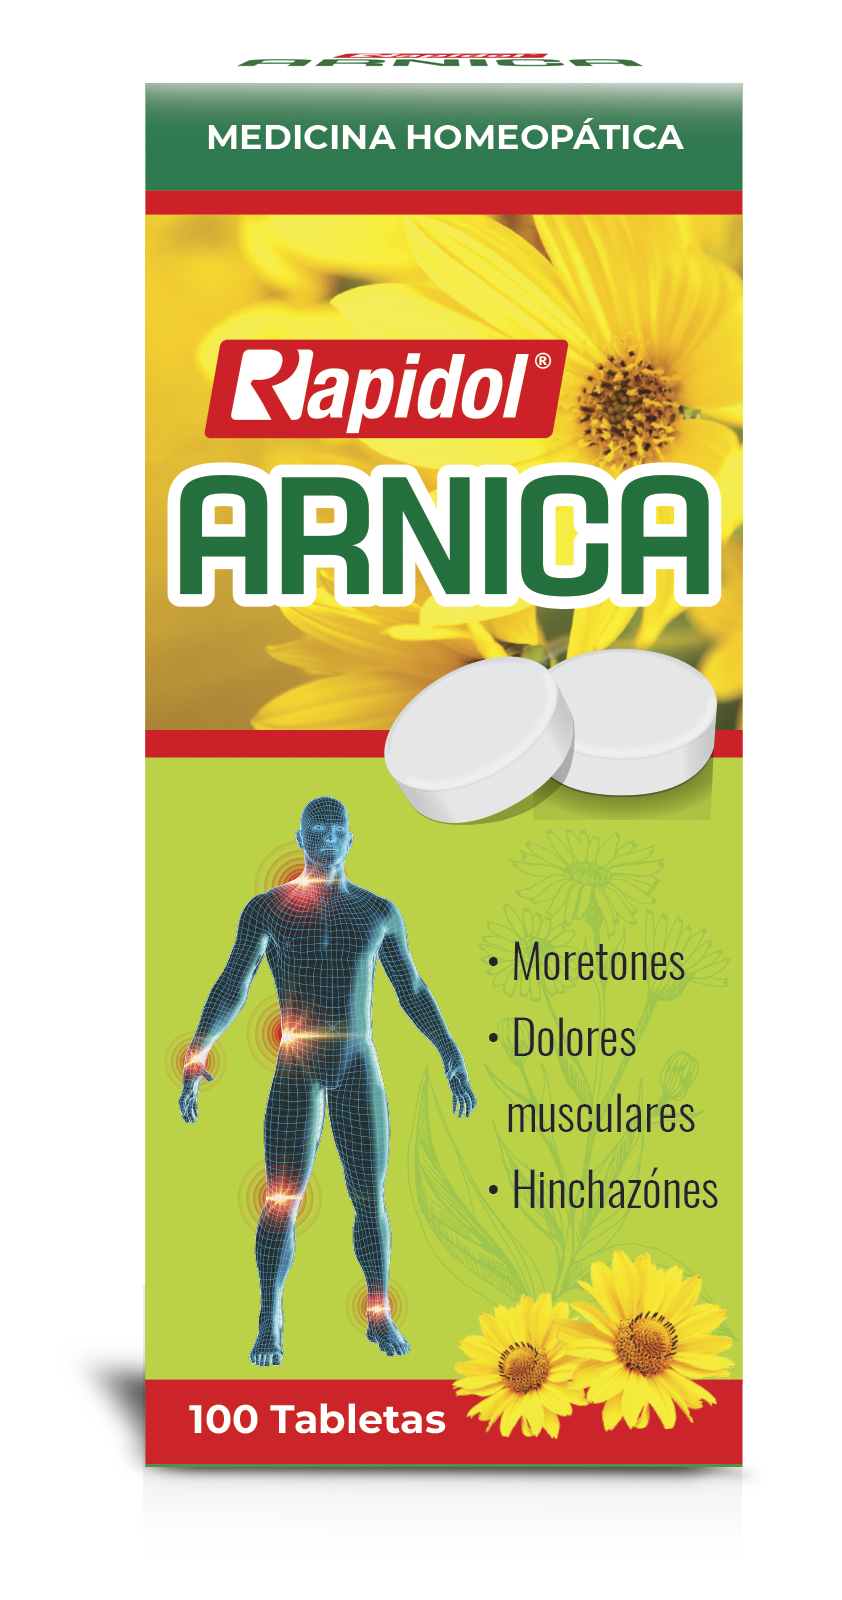 Rapidol® Arnica Tablets 100Caps. Homeopathic medicine